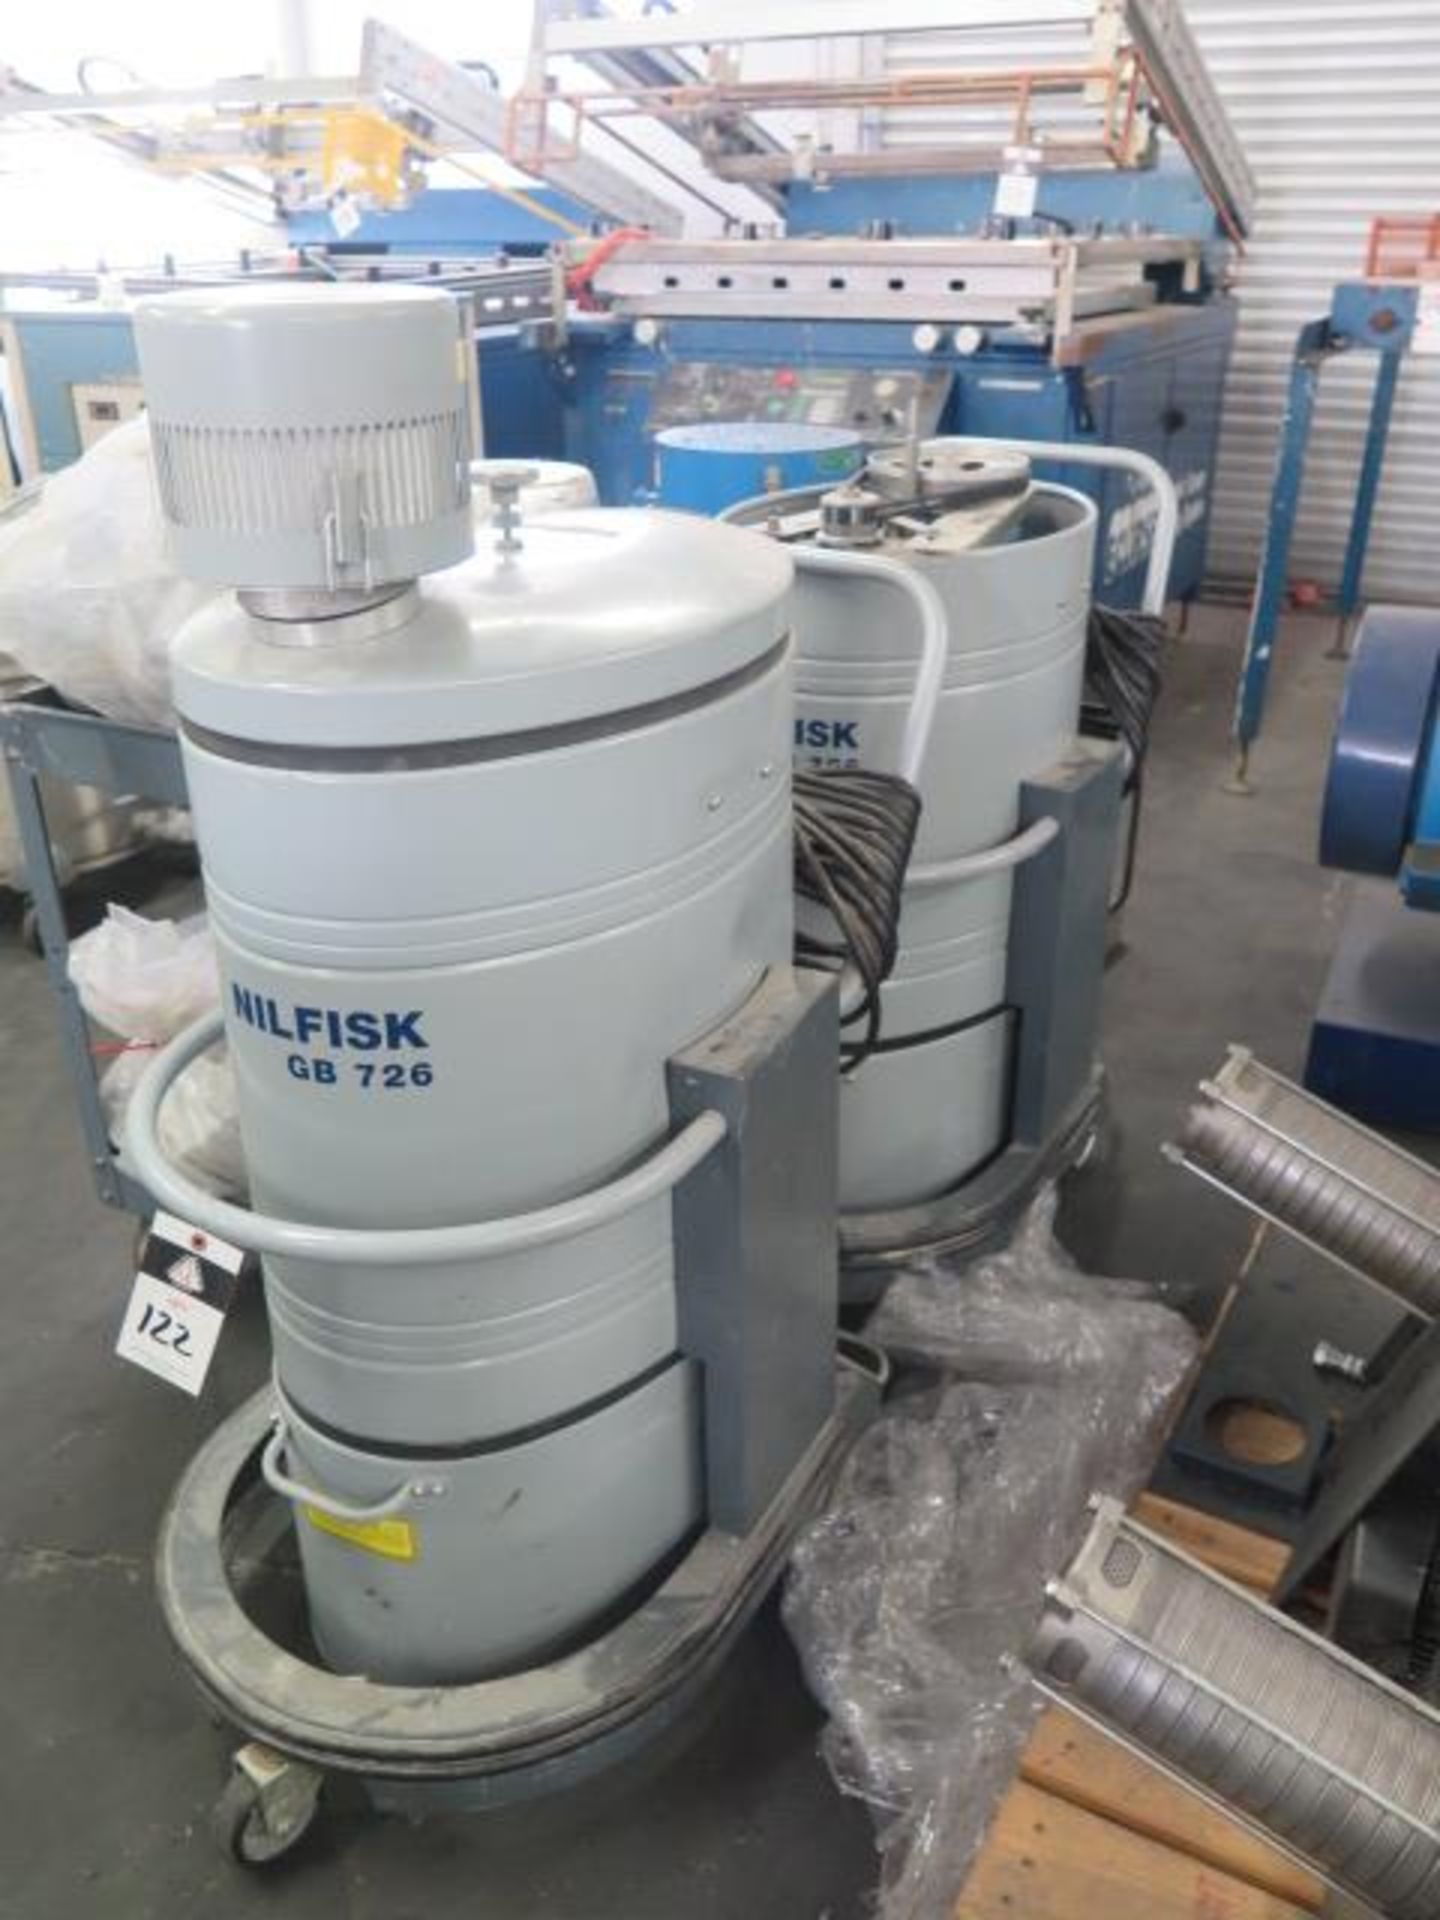 Nilfisk GB726 Industrial Vacuum (w/ Second Unit for Parts) (SOLD AS-IS - NO WARRANTY)